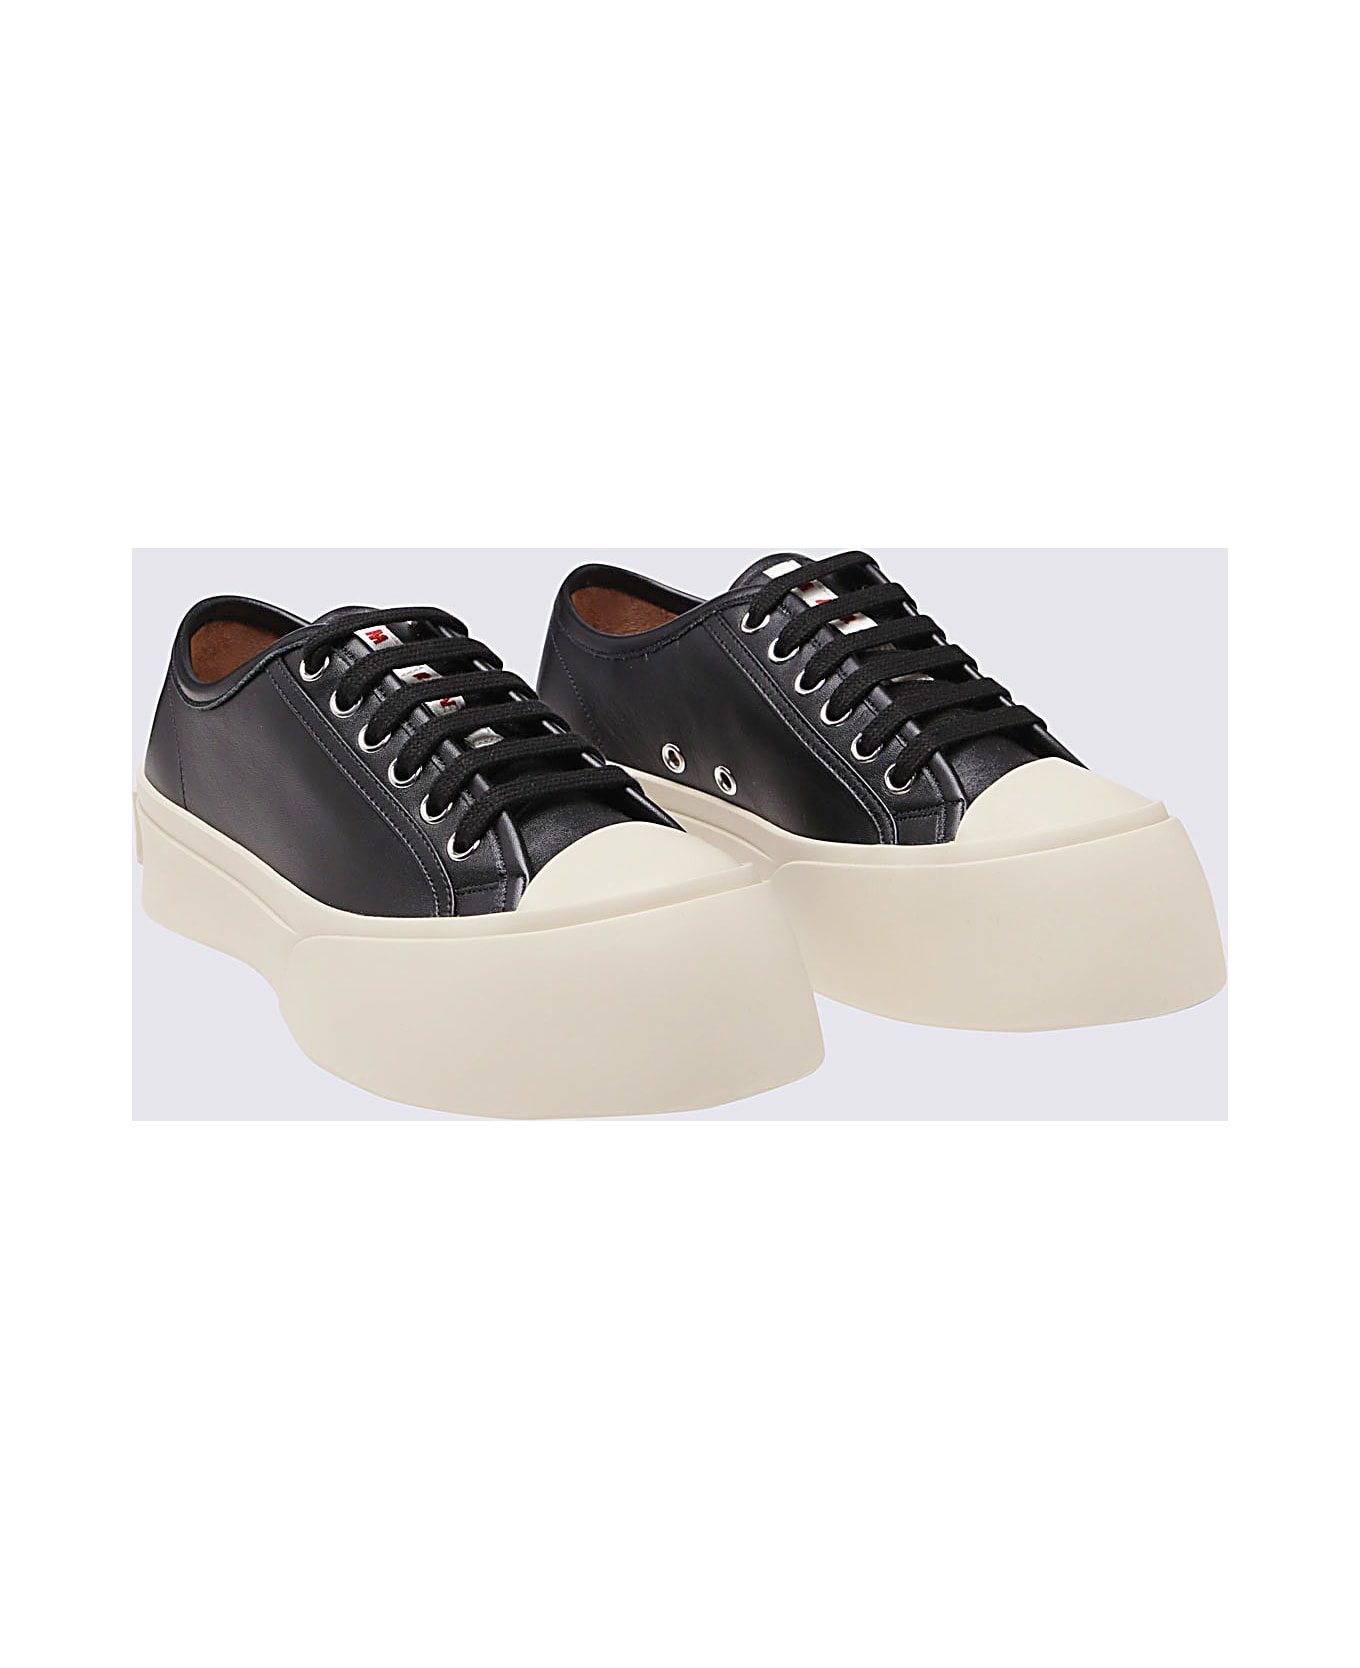 Marni Black And White Leather Pablo Sneakers - Black